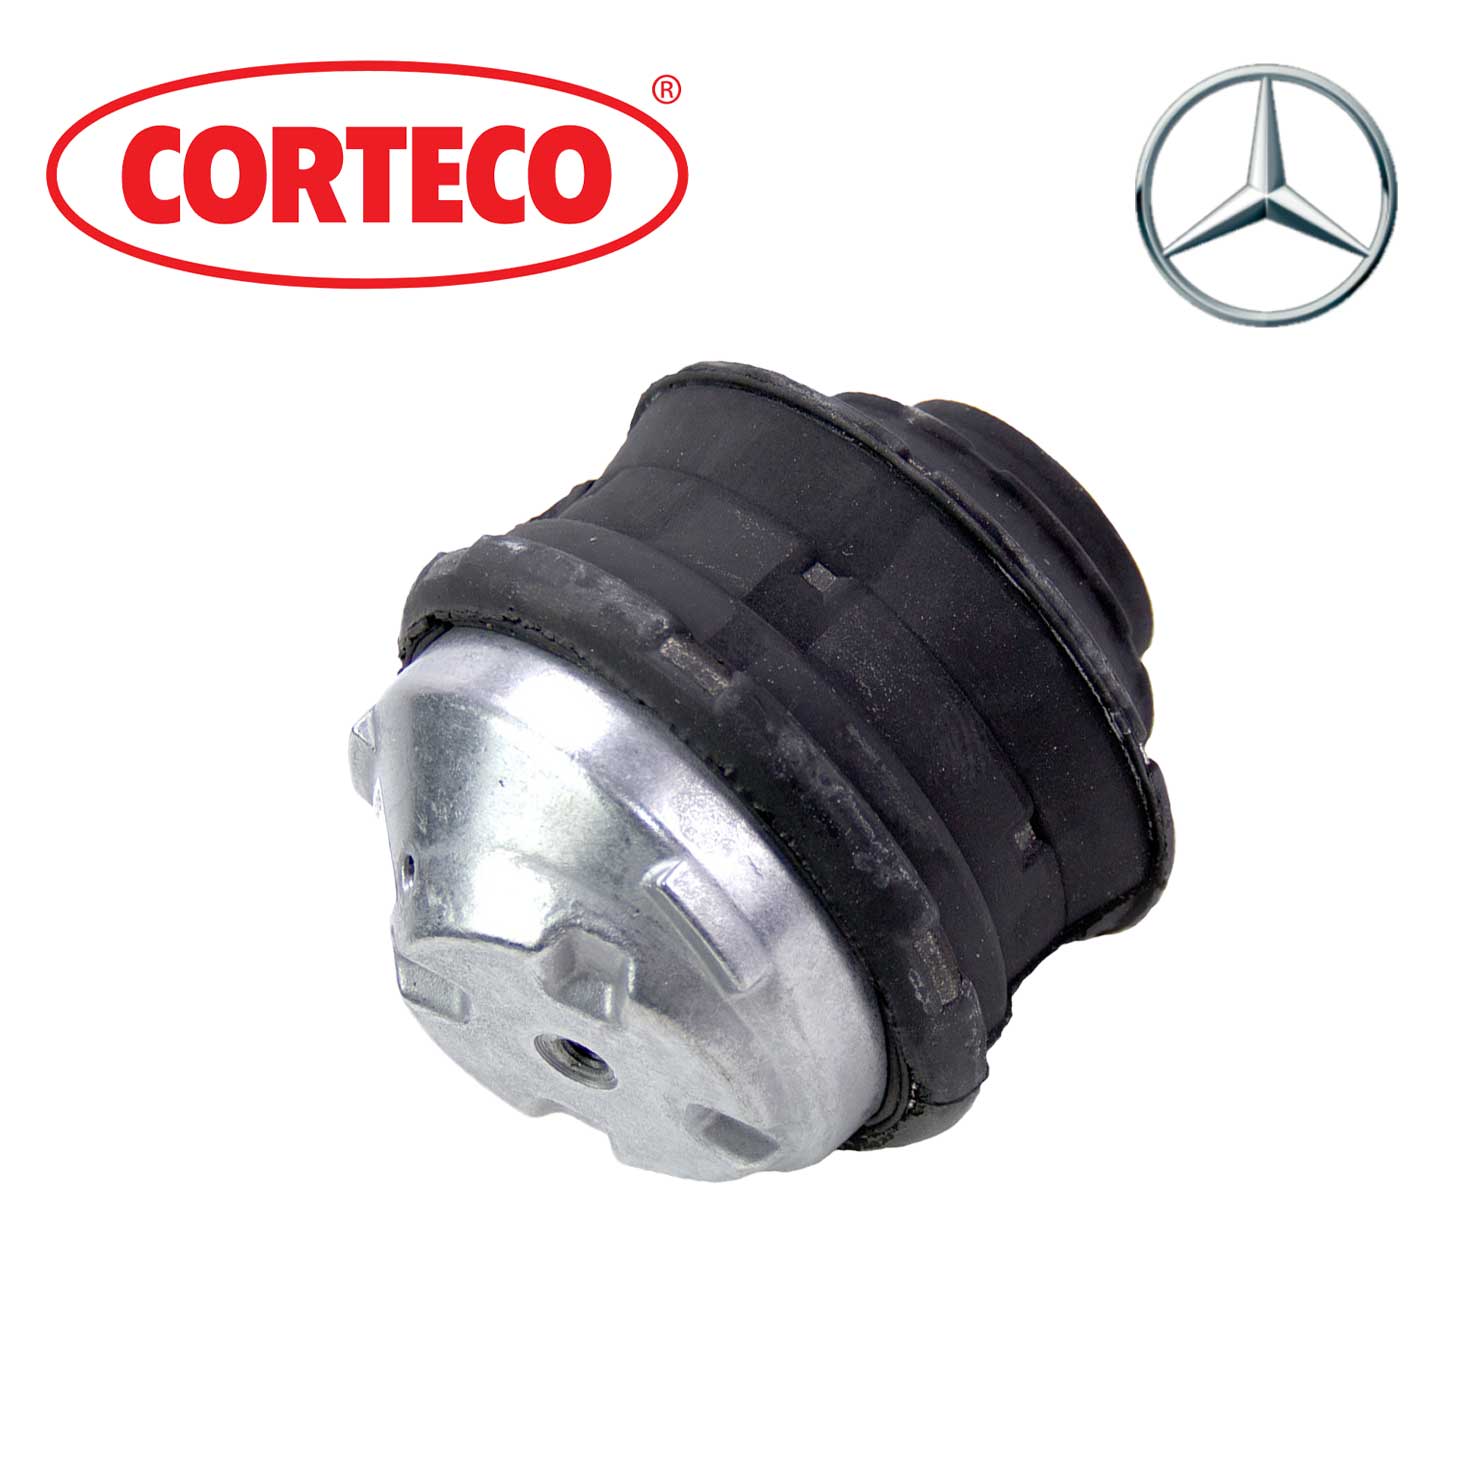 CORTECO (COR # 80001067) ENGINE MOUNTING For Mercedes Benz C216 C219 R230 S211 W211 W221 2112403117